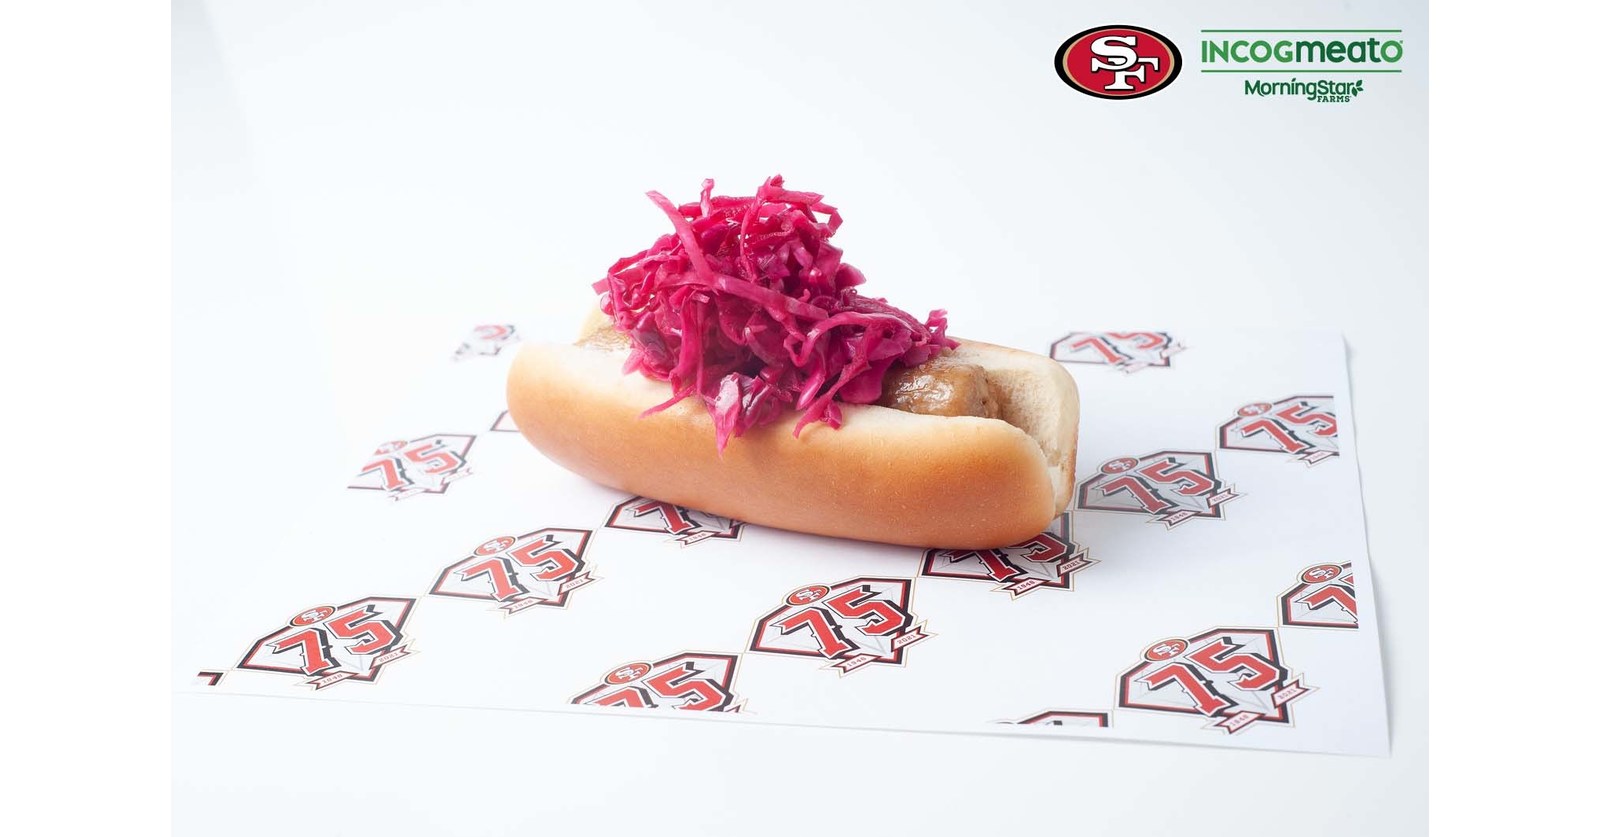 San Francisco 49ers and Levi's® Stadium Run New Menu Option Play:  Incogmeato® by MorningStar Farms®